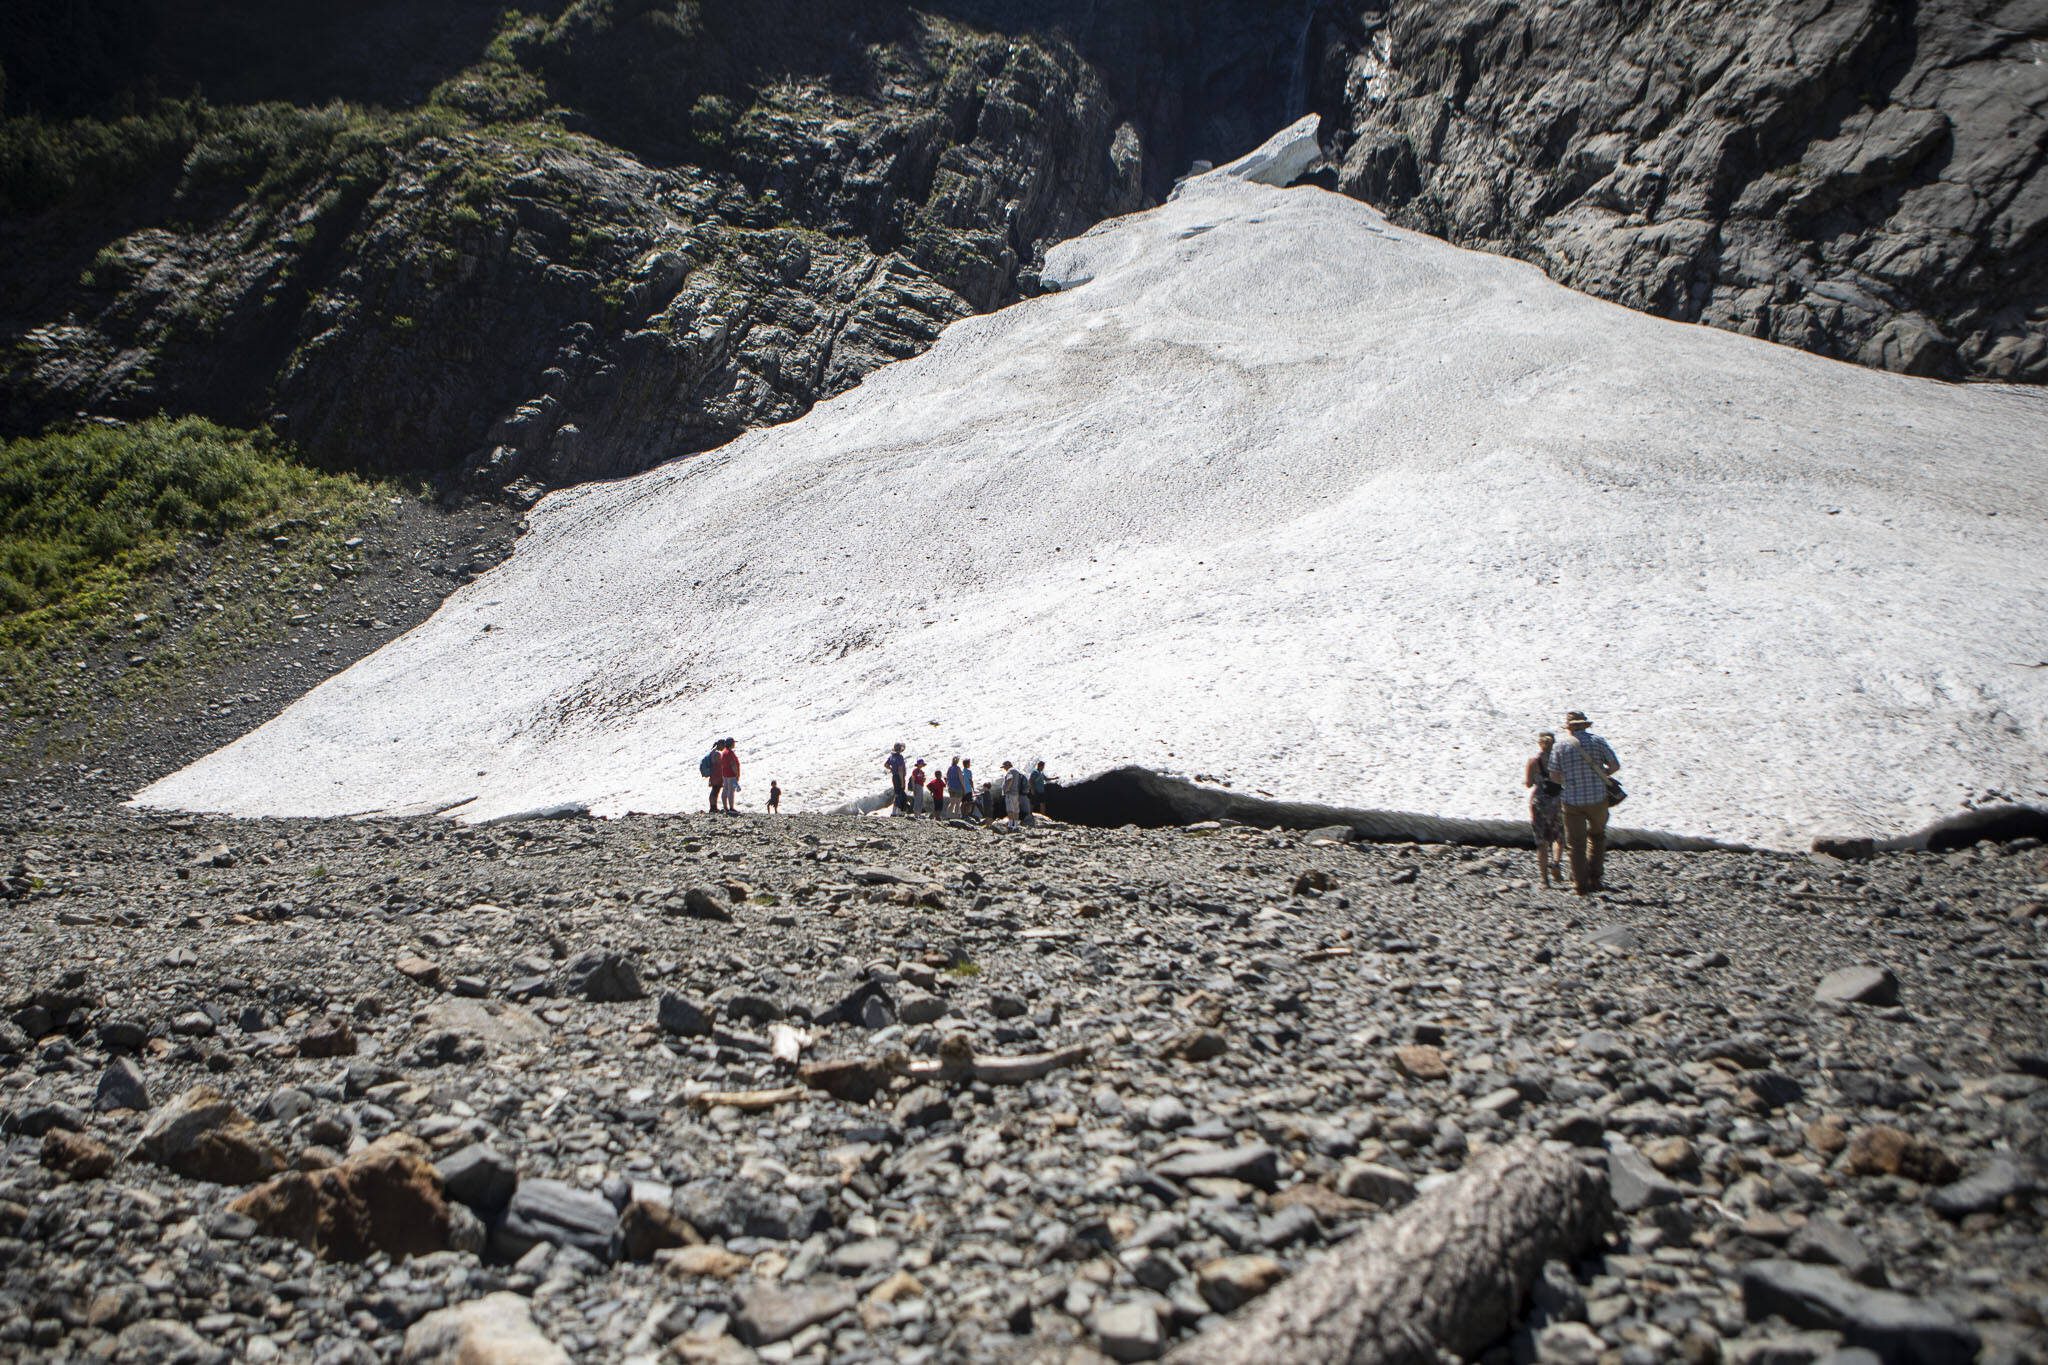 People explore at the Big Four Ice Caves along the Mountain Loop Highway in Snohomish County, Washington on Wednesday, July 19, 2023. (Annie Barker / The Herald)